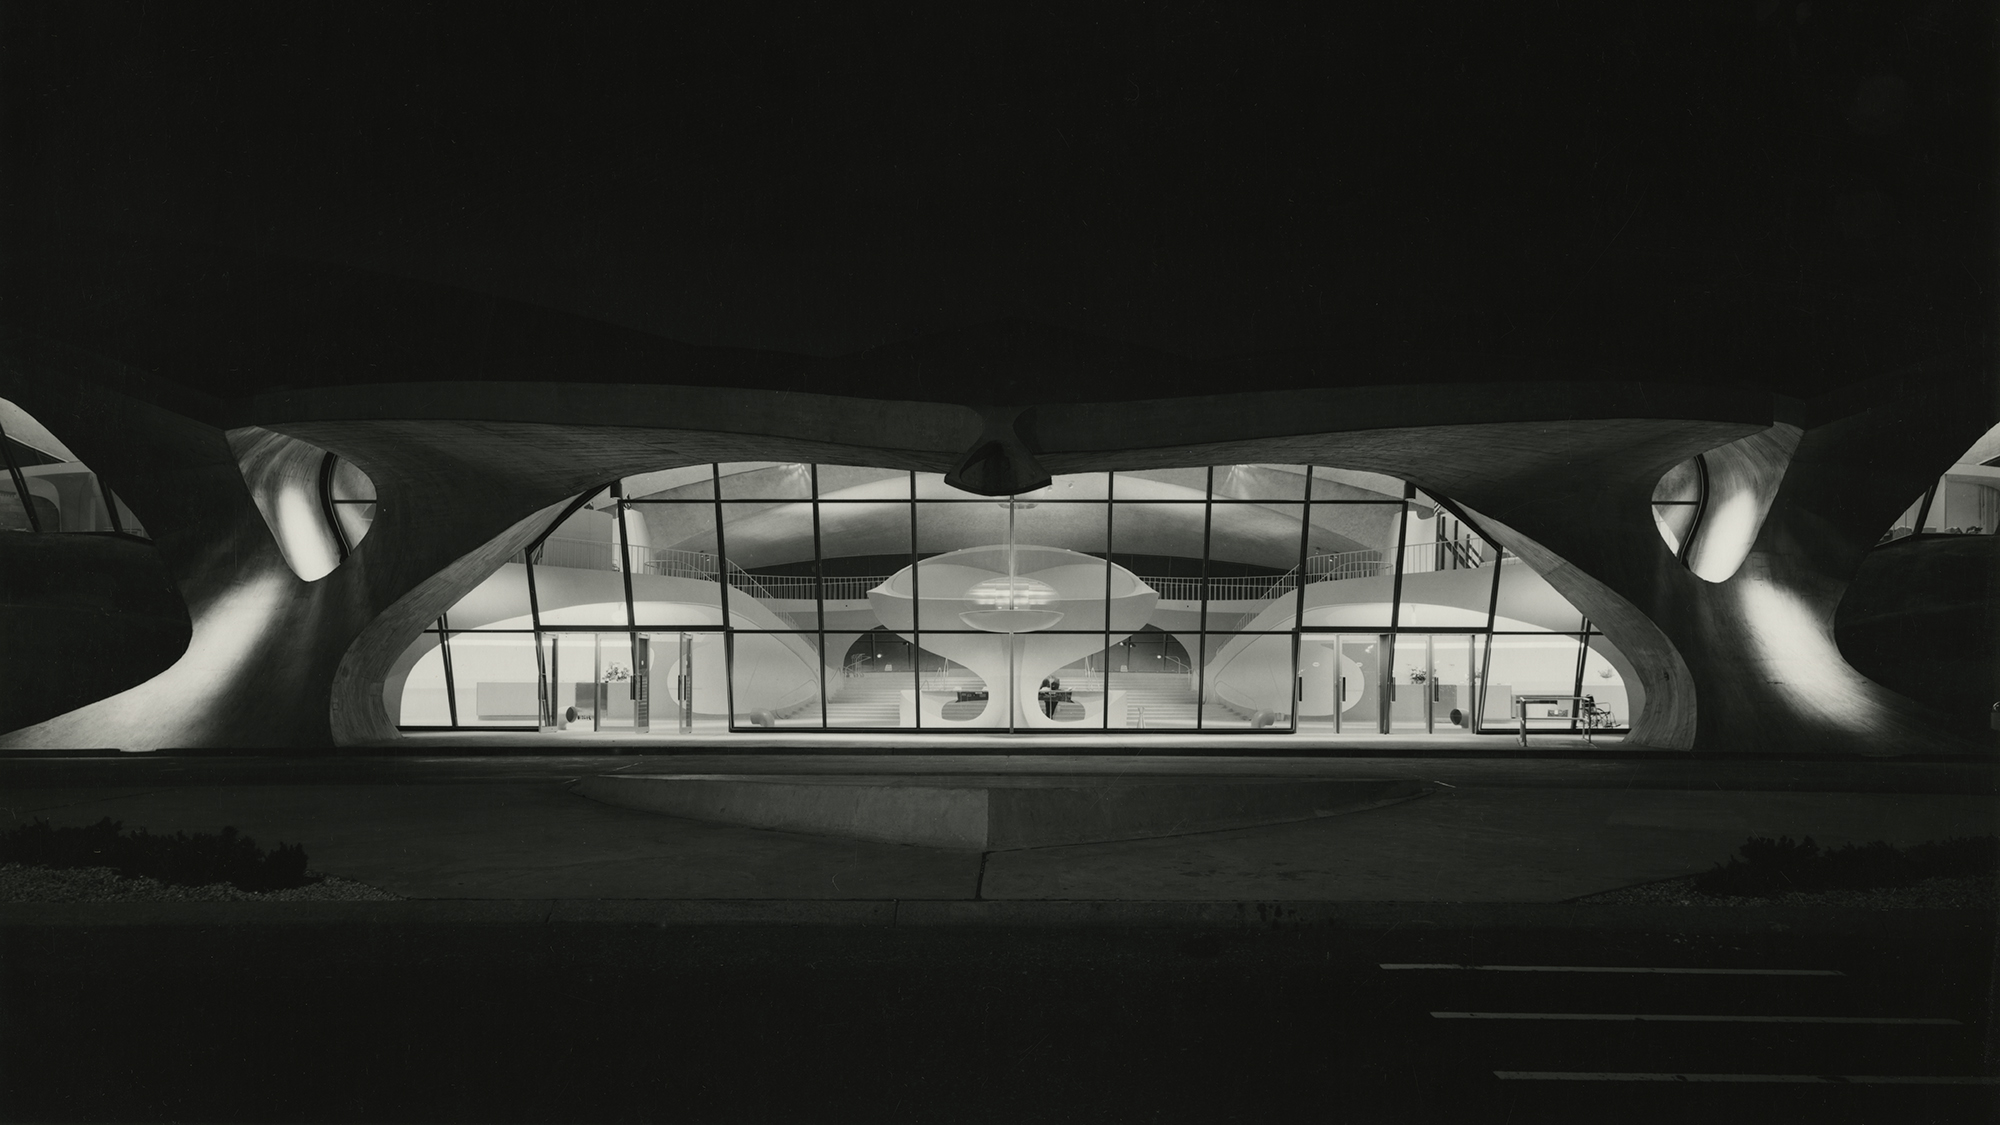 Ezra Stoller: Photographs of Architecture | The Cooper Union